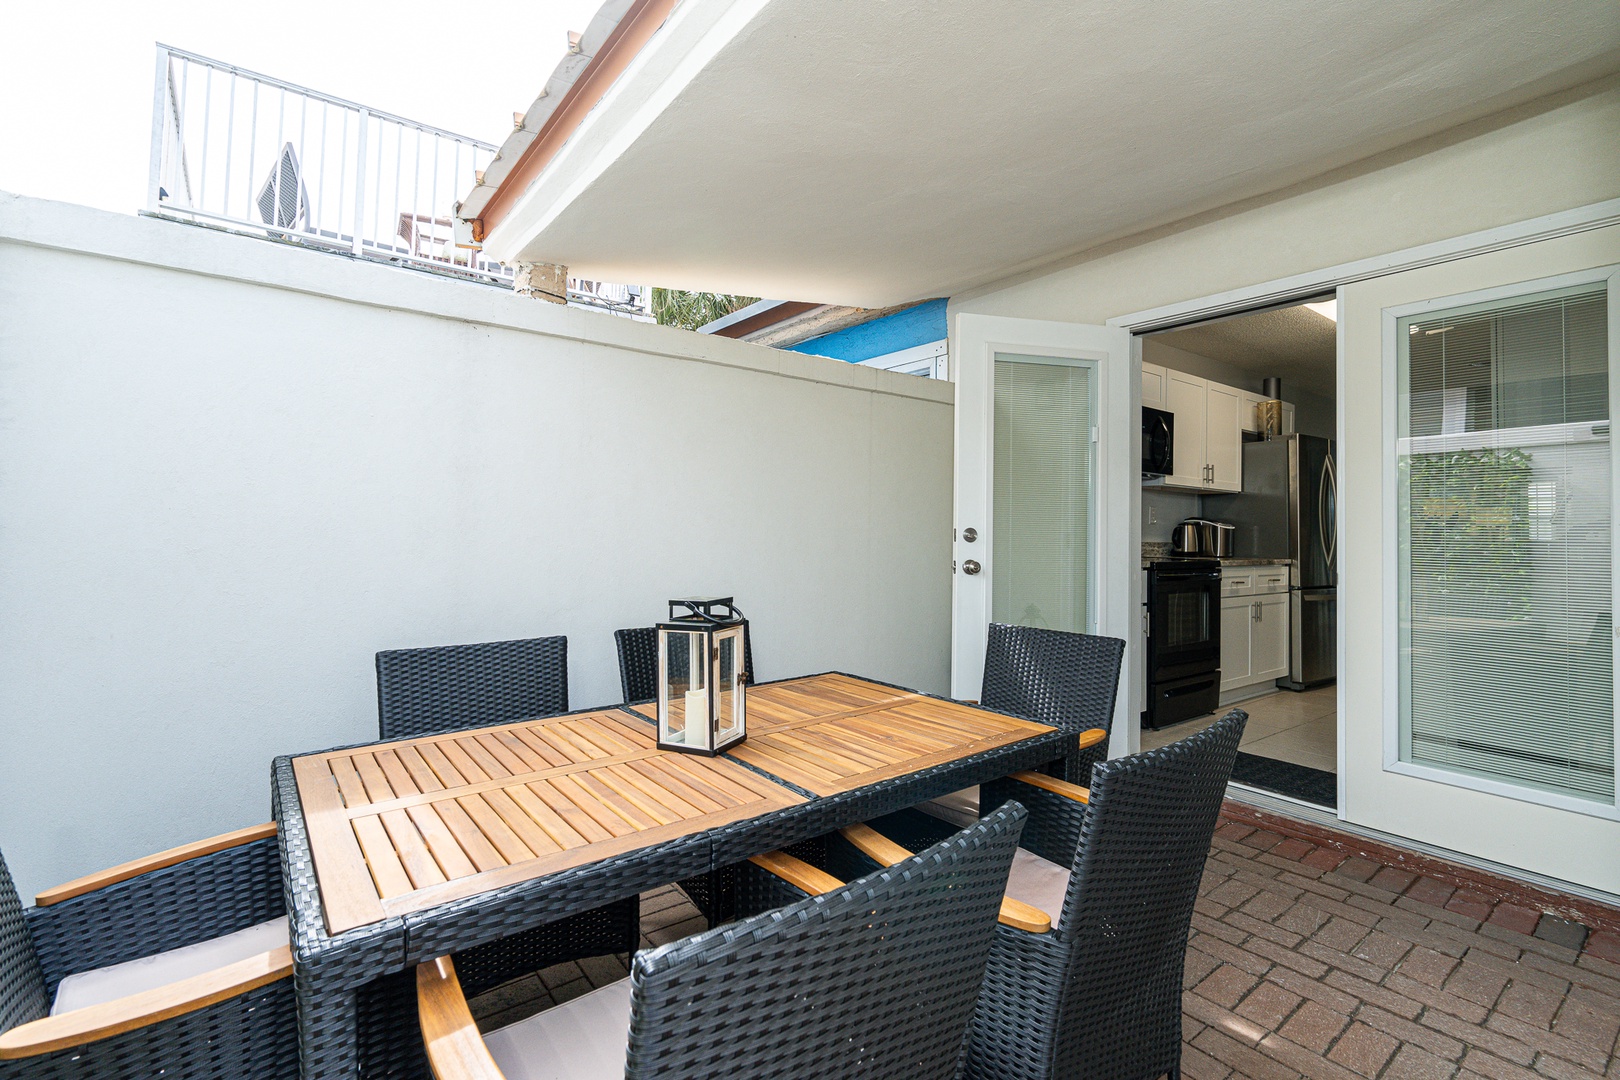 Lounge the day away or dine alfresco on the breezy back patio